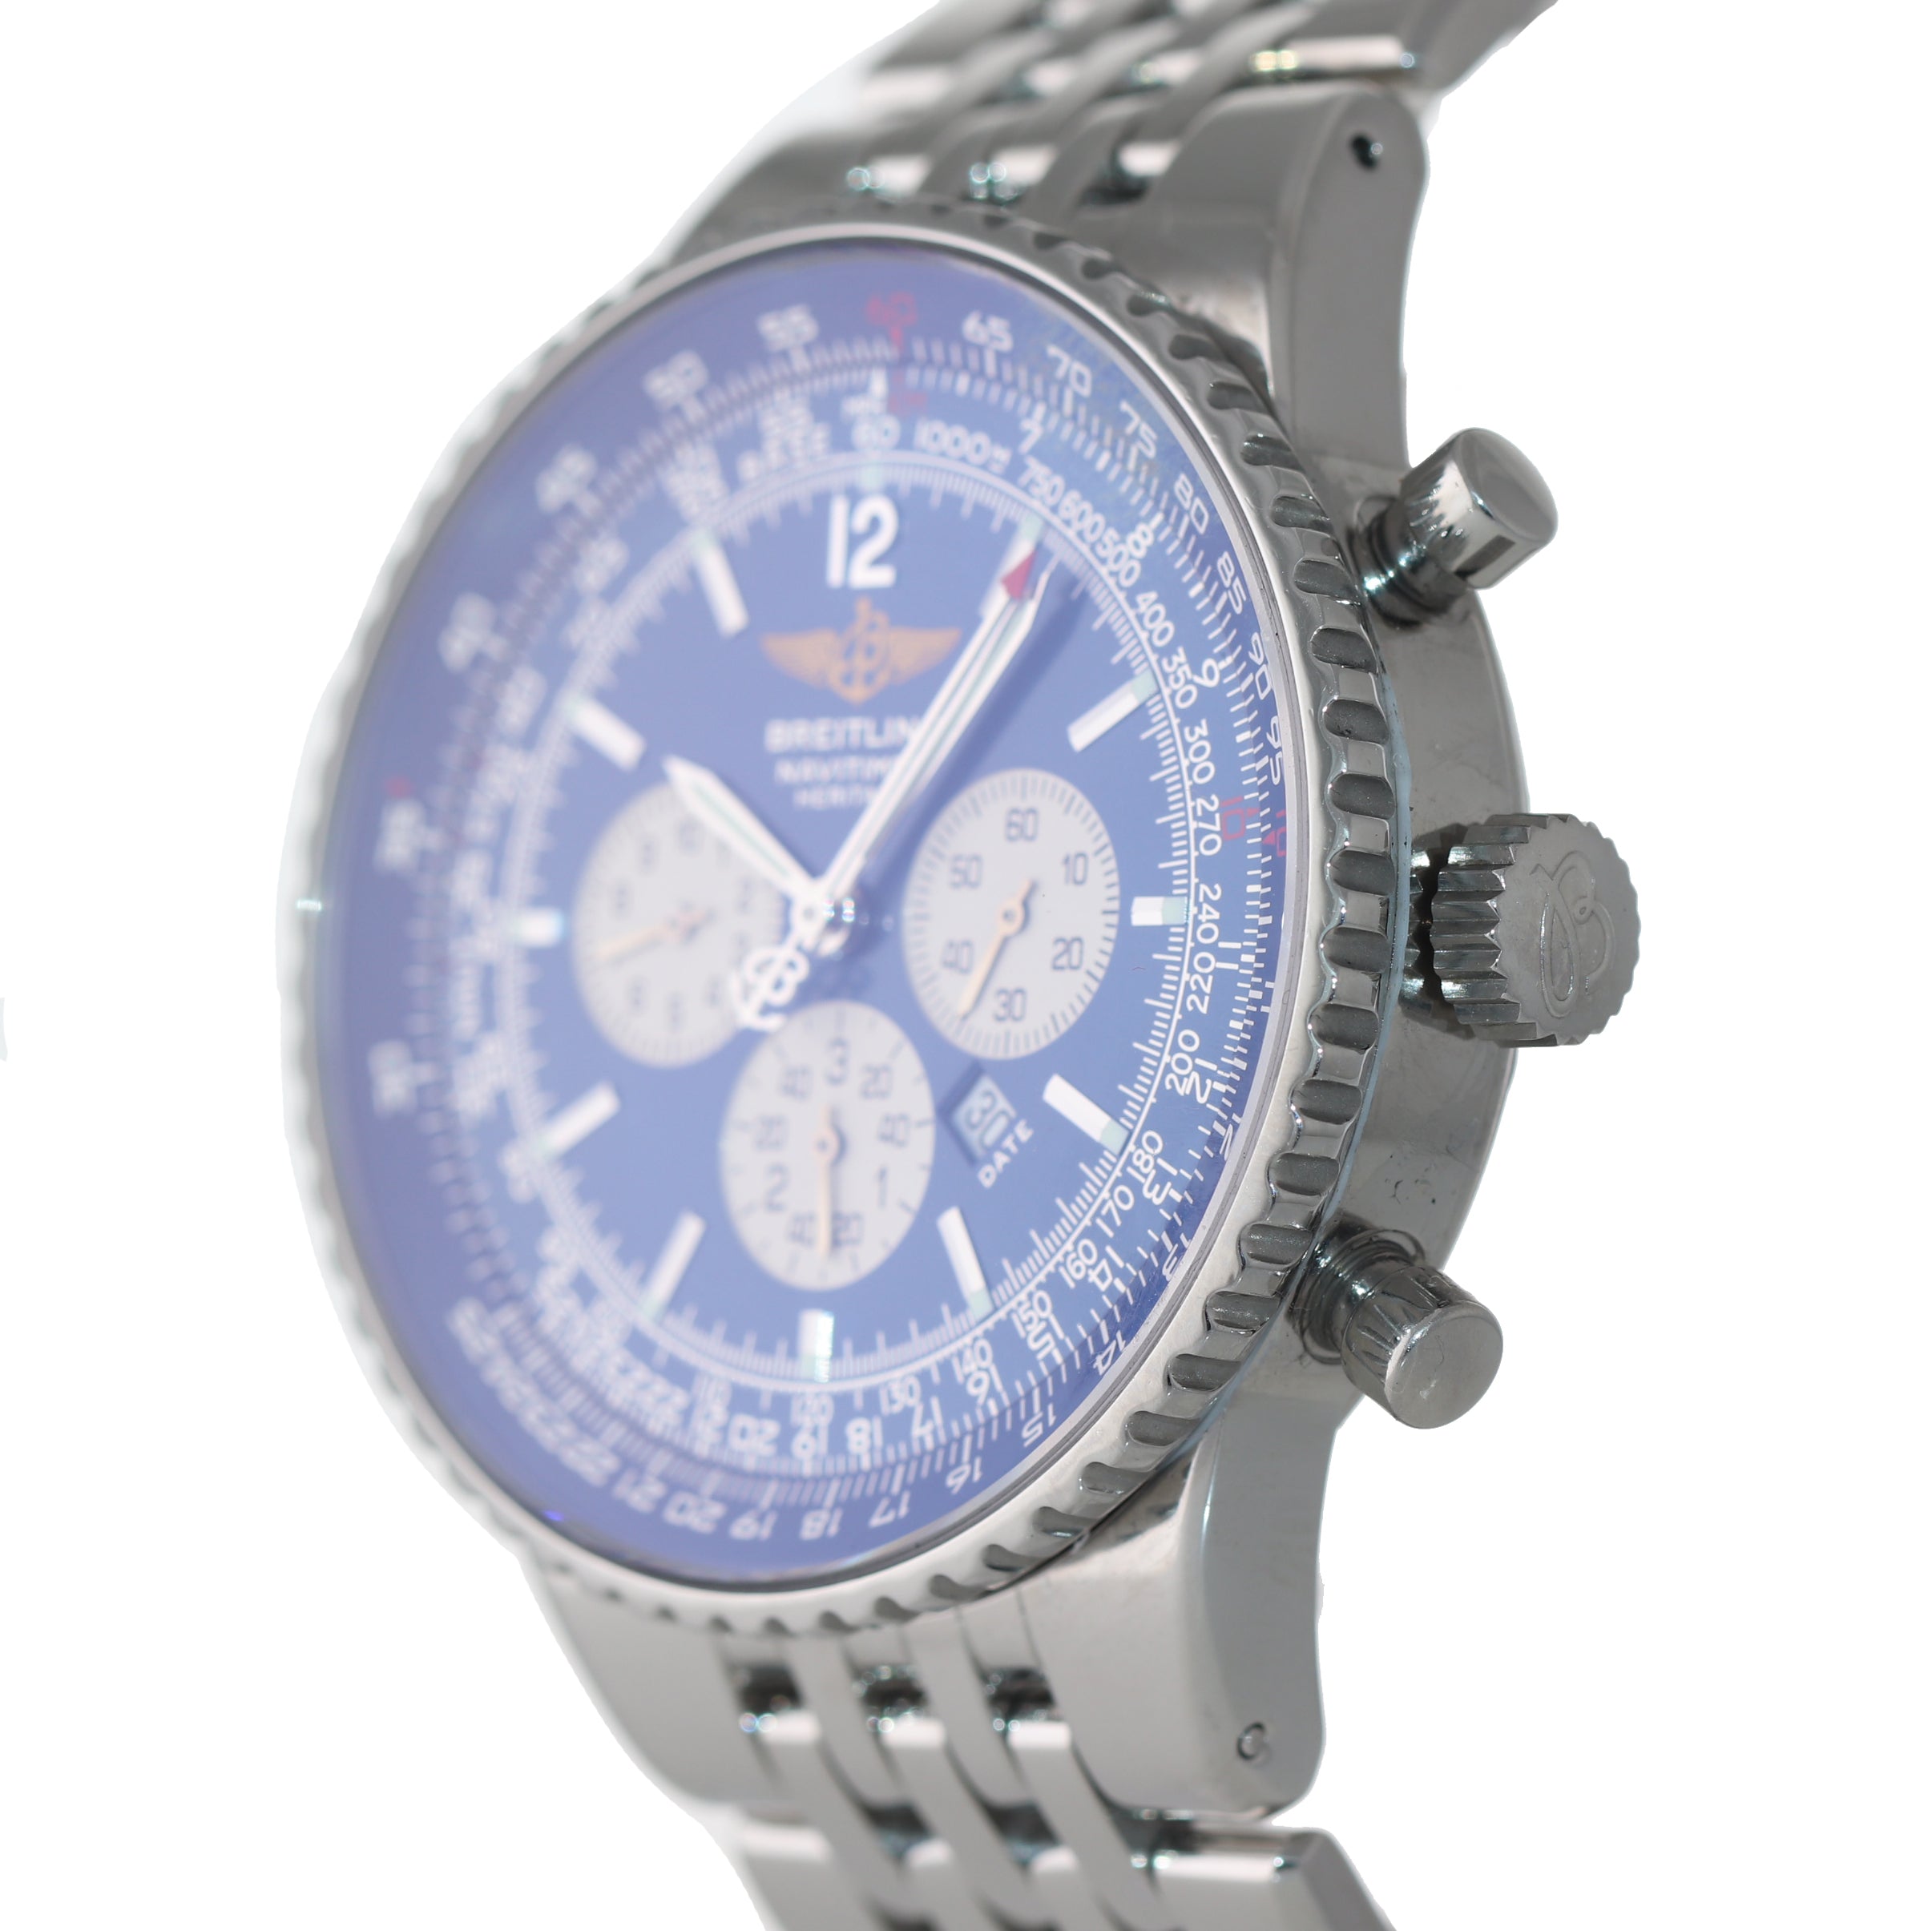 MINT Breitling Navitimer Heritage A35350 Blue Stainless Chronograph 43mm Watch